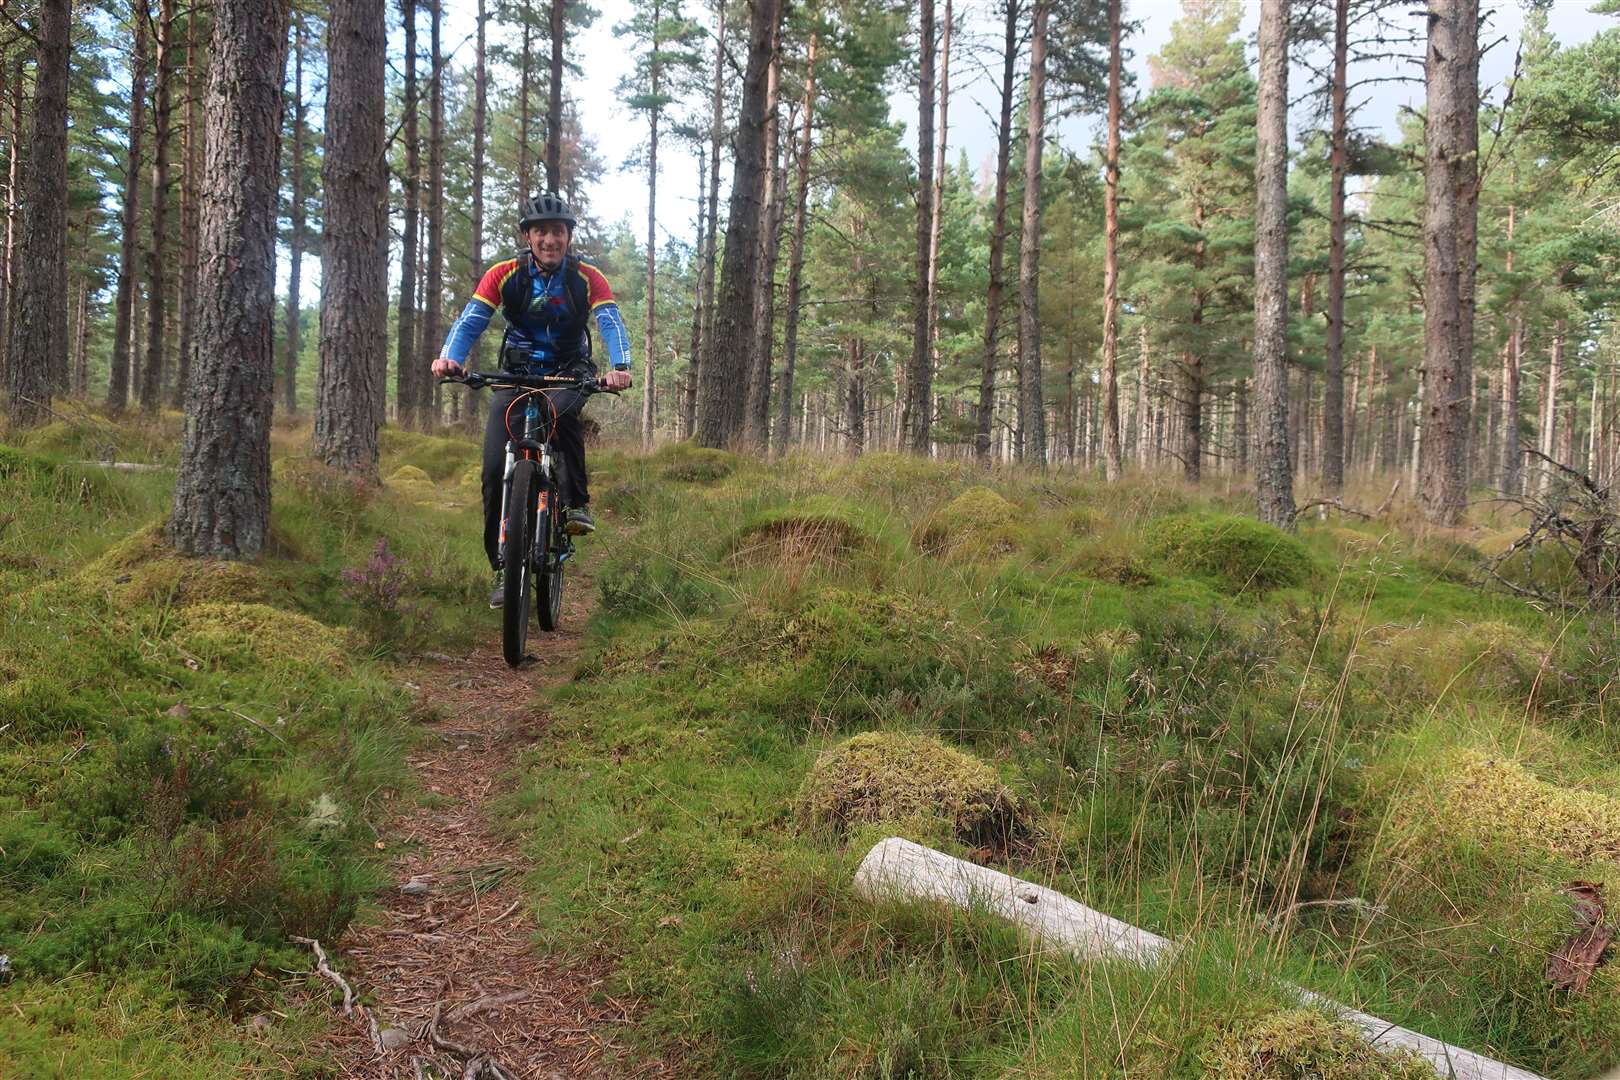 John enjoying the beautiful singletrack which was an unexpected find on this route.